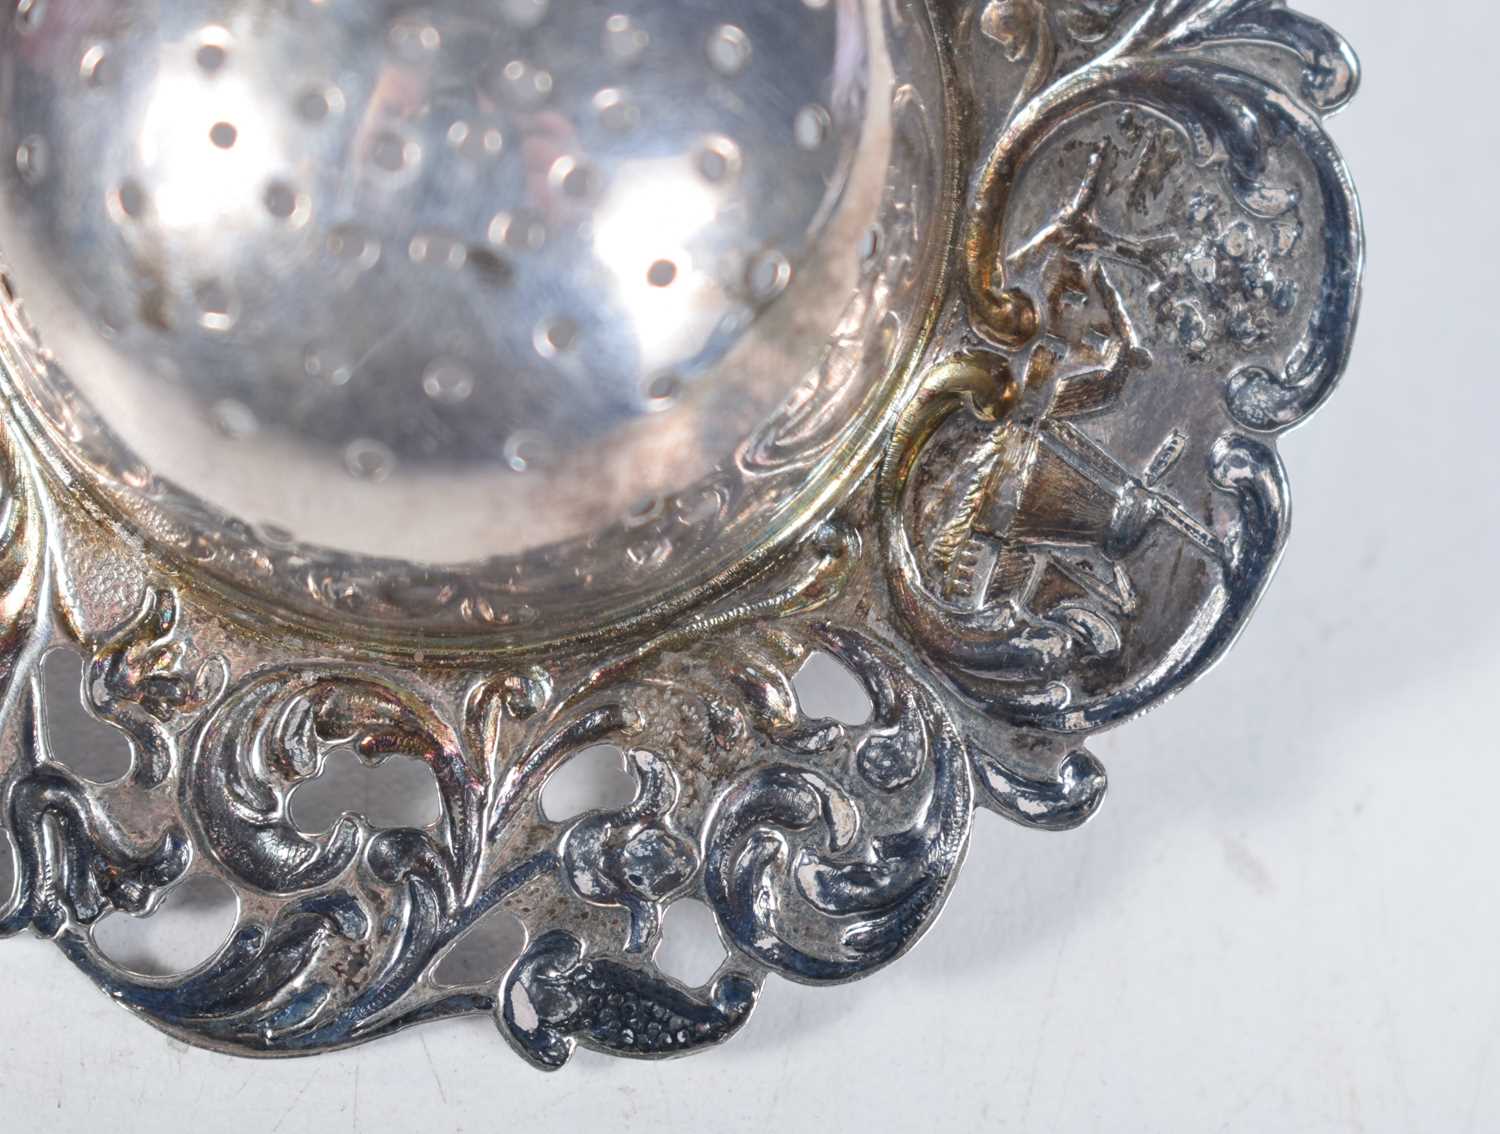 A Dutch Silver Tea Strainer with ornate decoration. 12.5 cm x 7.5 cm, weight 41g - Image 16 of 17